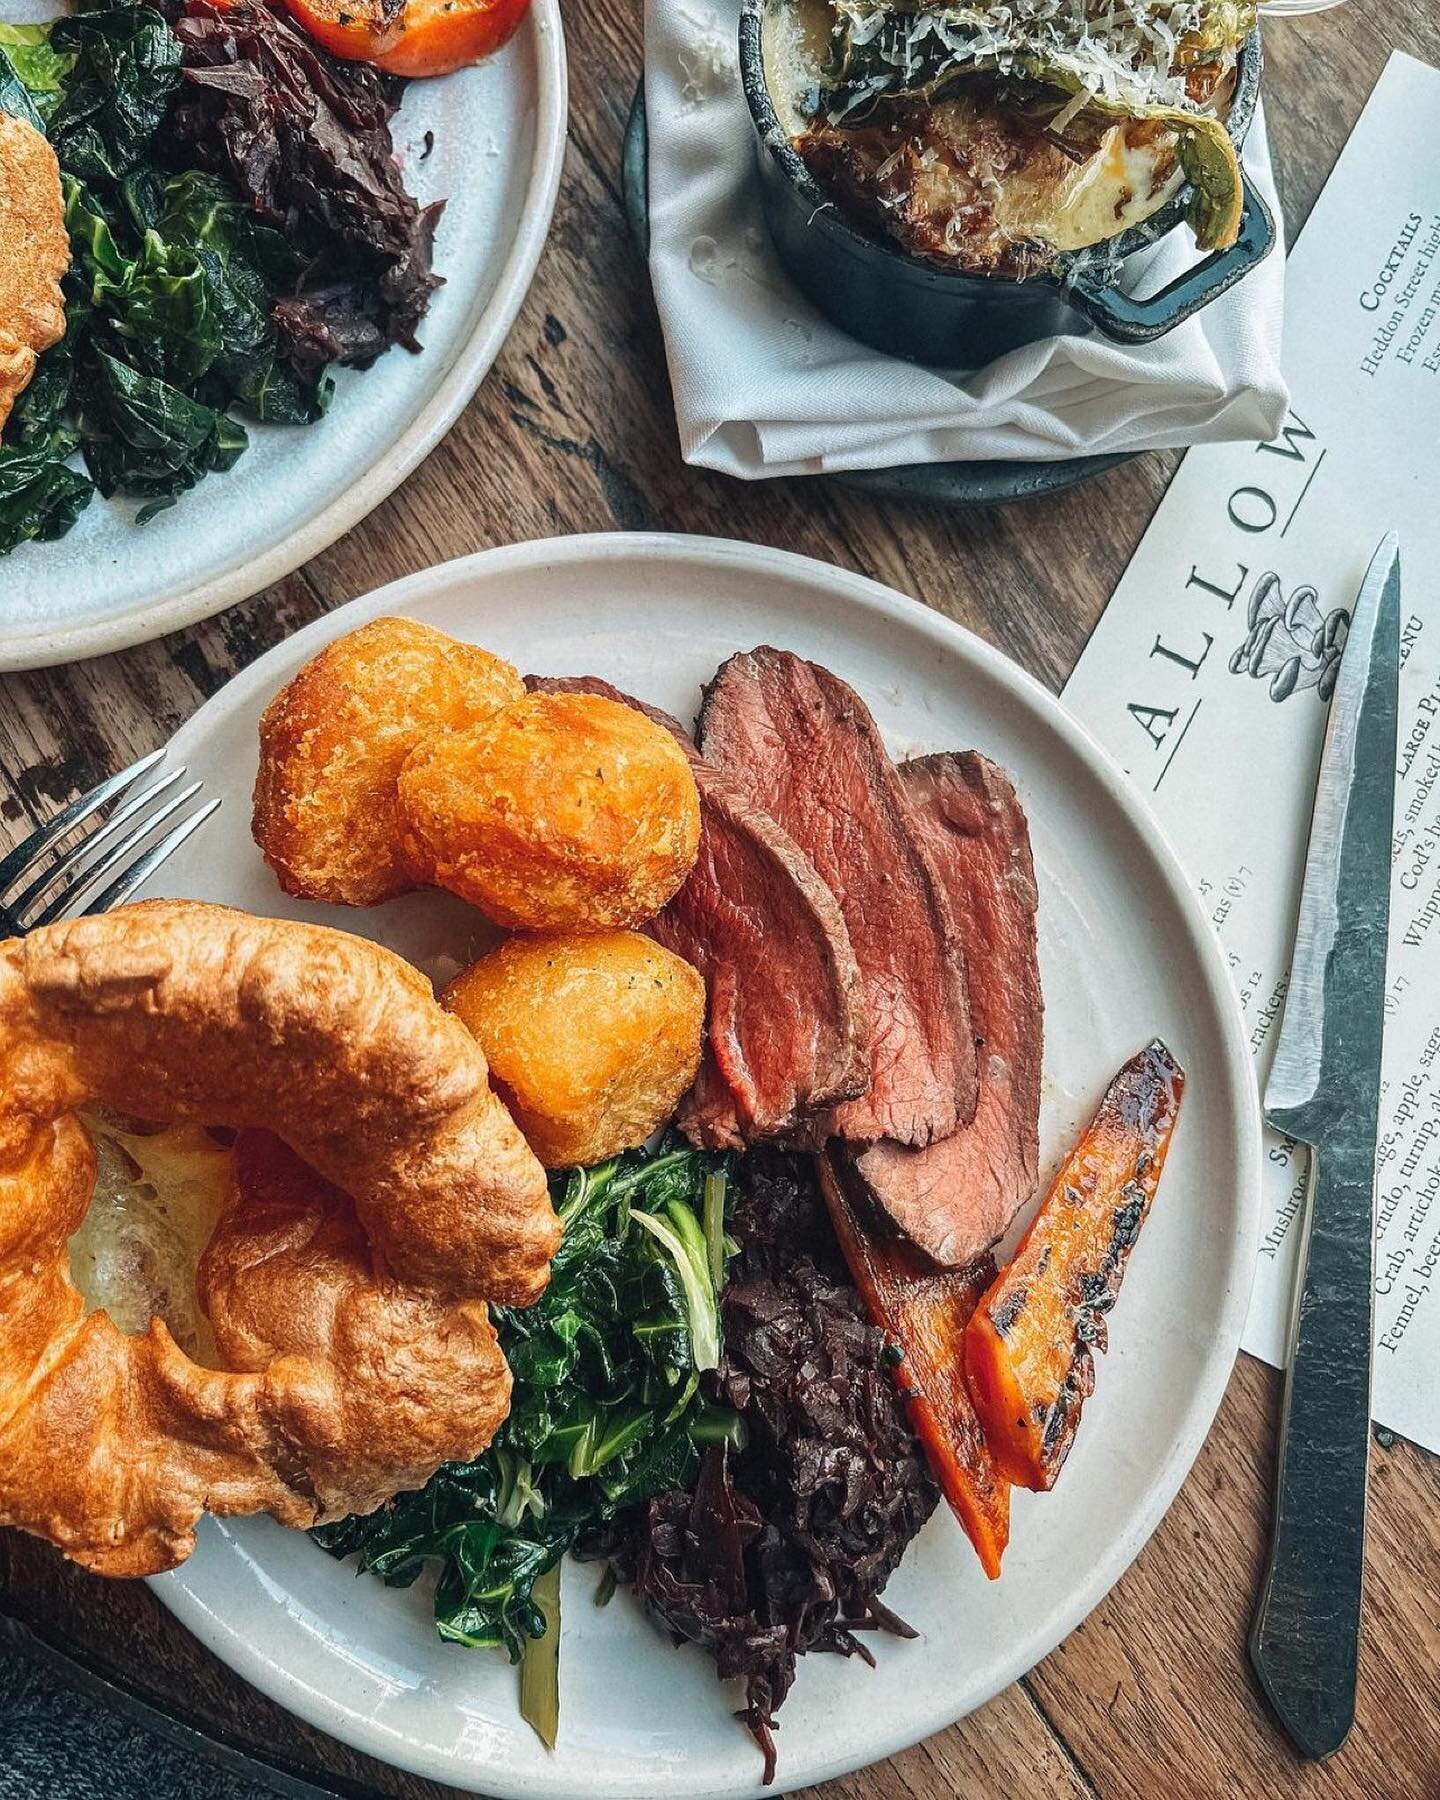 &bull; @fallowrestaurant &bull; The Fallow roast really is a thing of beauty - delicious dairy cow rump, paired with fluffy Yorkshire puddings, roast potatoes, glazed carrots, red cabbage, greens and gravy - and a side of smoked cauliflower cheese &b